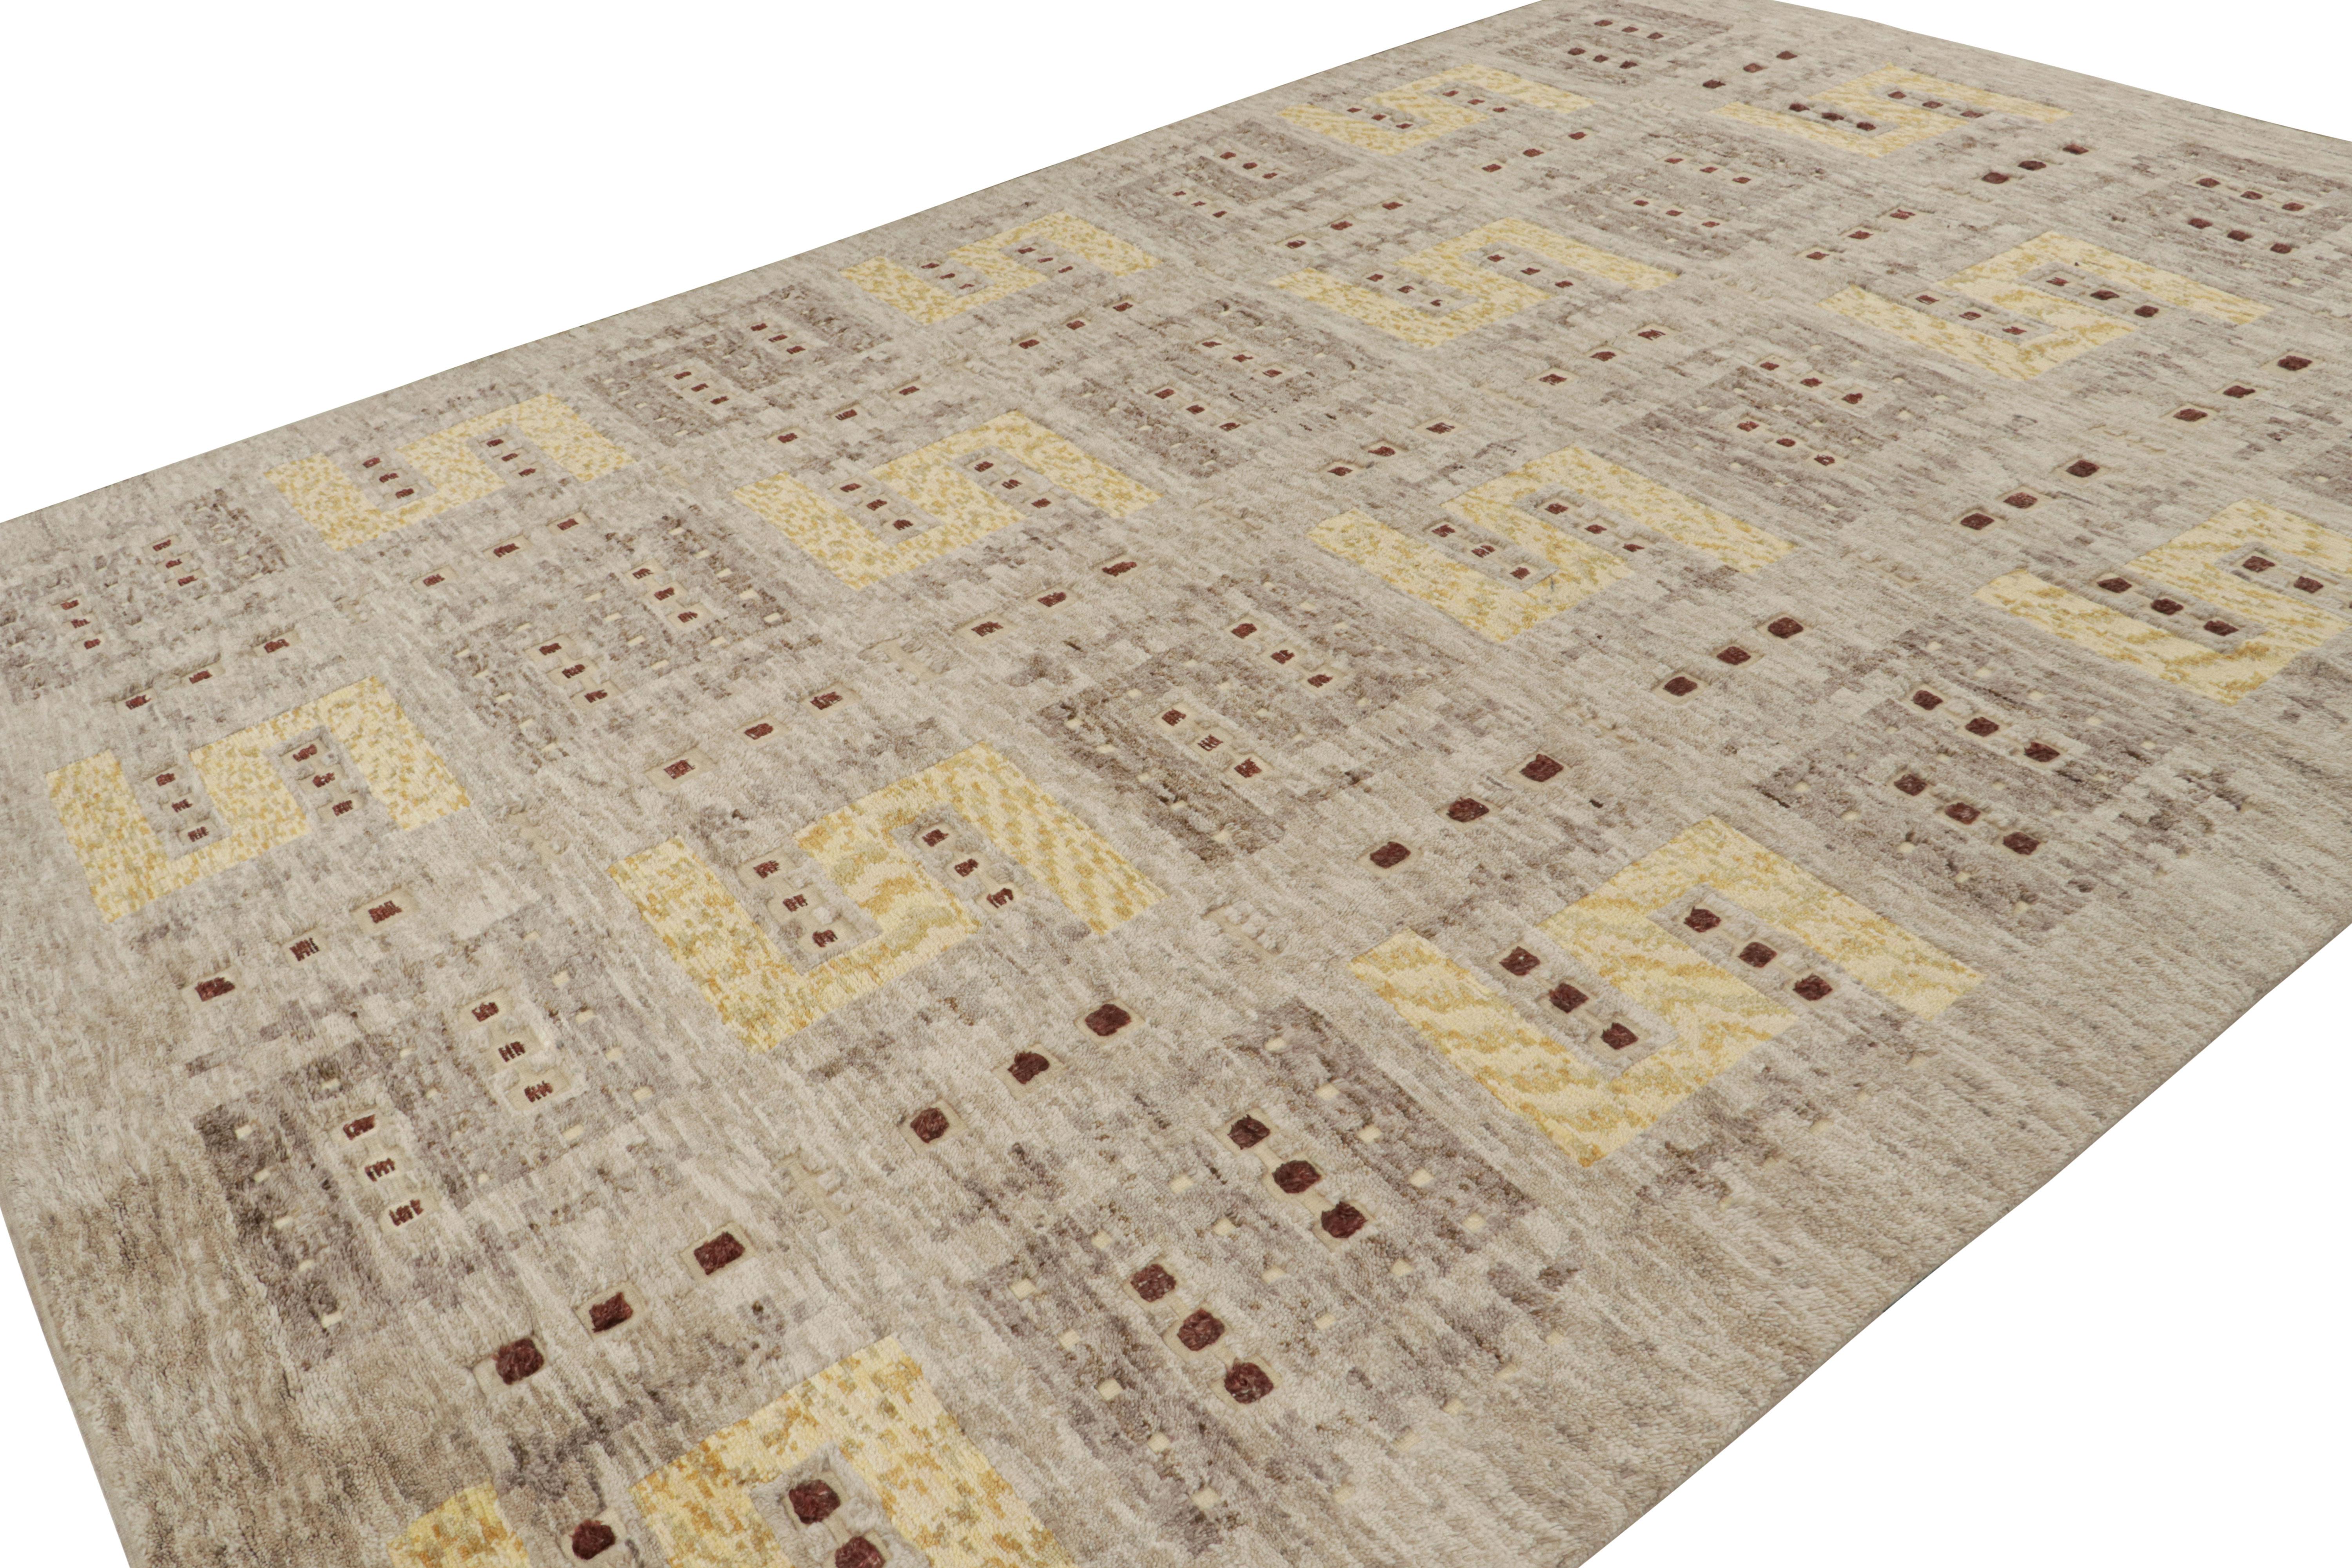 This 10x14 Swedish Kilim rug design is from the flatweaves in the Scandinavian rug collection by Rug & Kilim. Hand-knotted in wool, its design is inspired by Rollakhan and Rya rugs in the Swedish Deco style. 

On the Design: 

Beige-brown, gray and